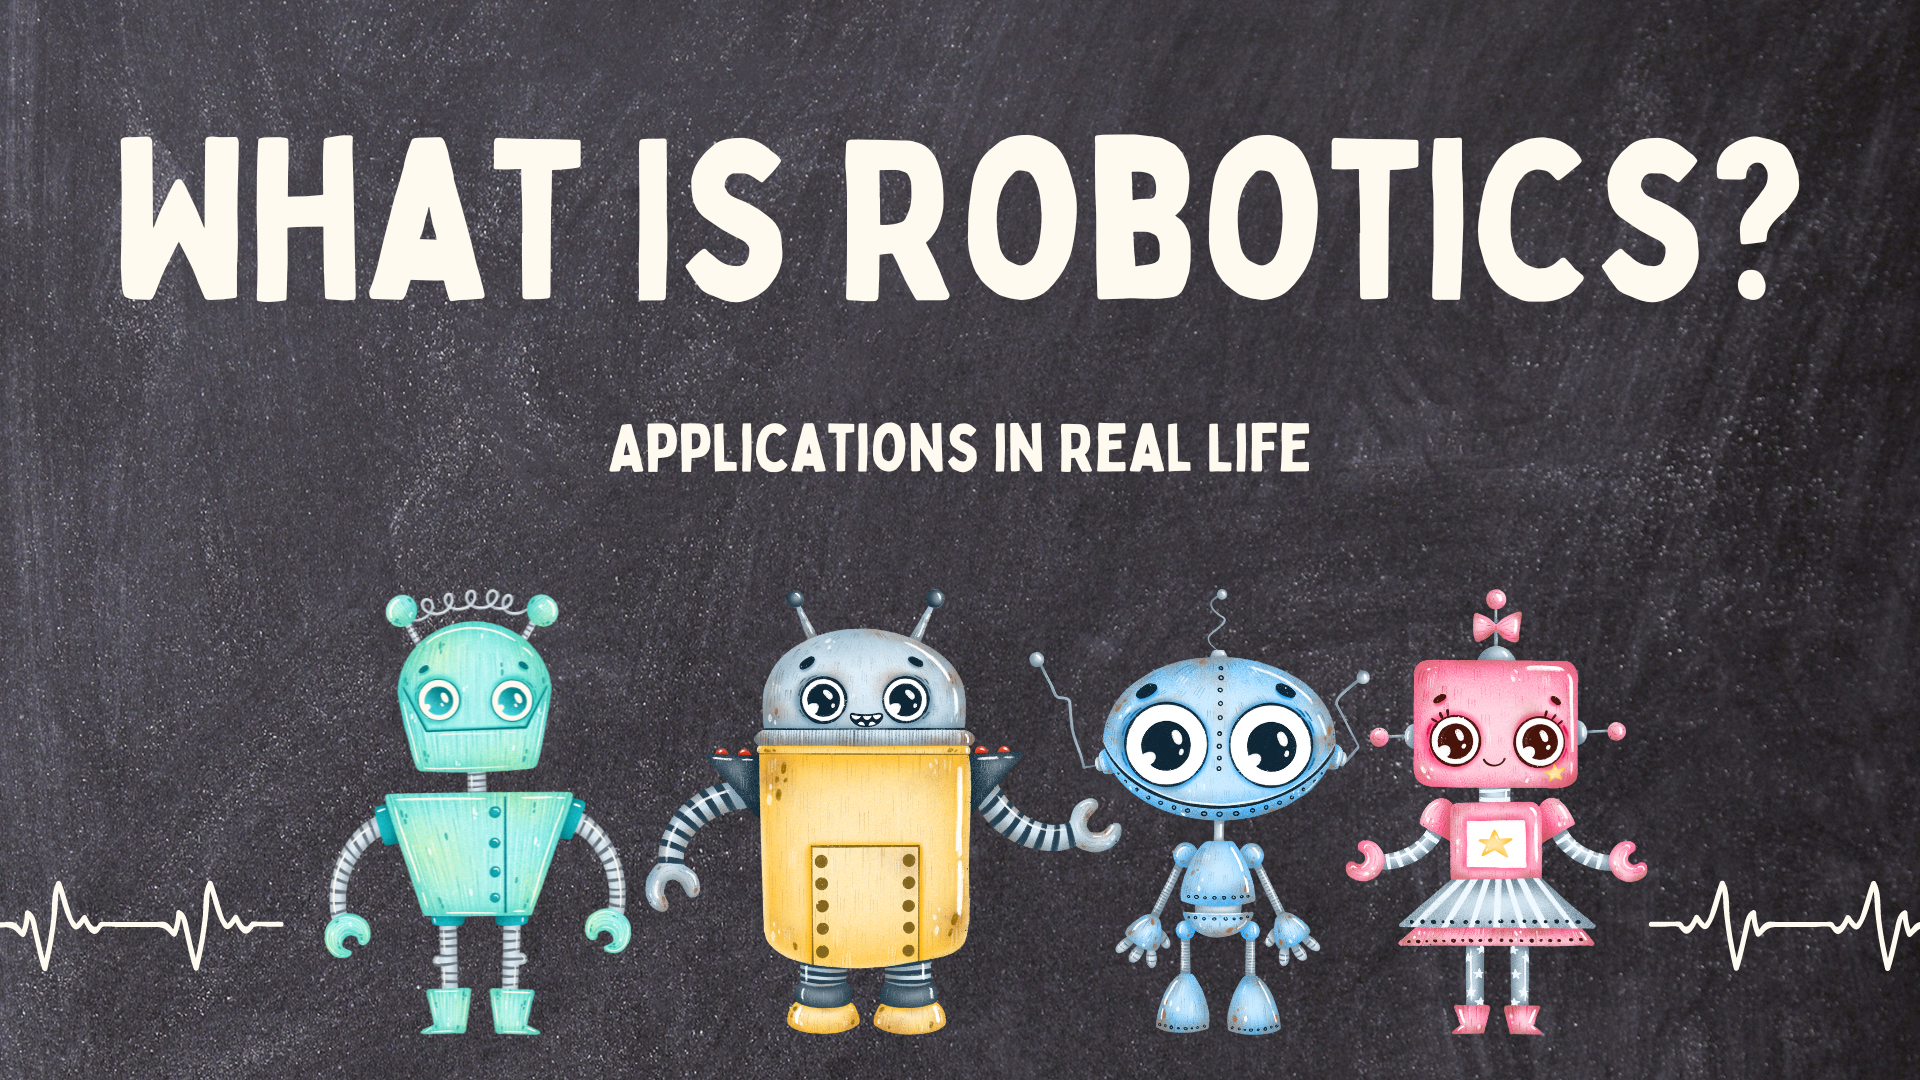 Robotics What Is Robotics History, Uses, Types, & Facts Applications in Real Life